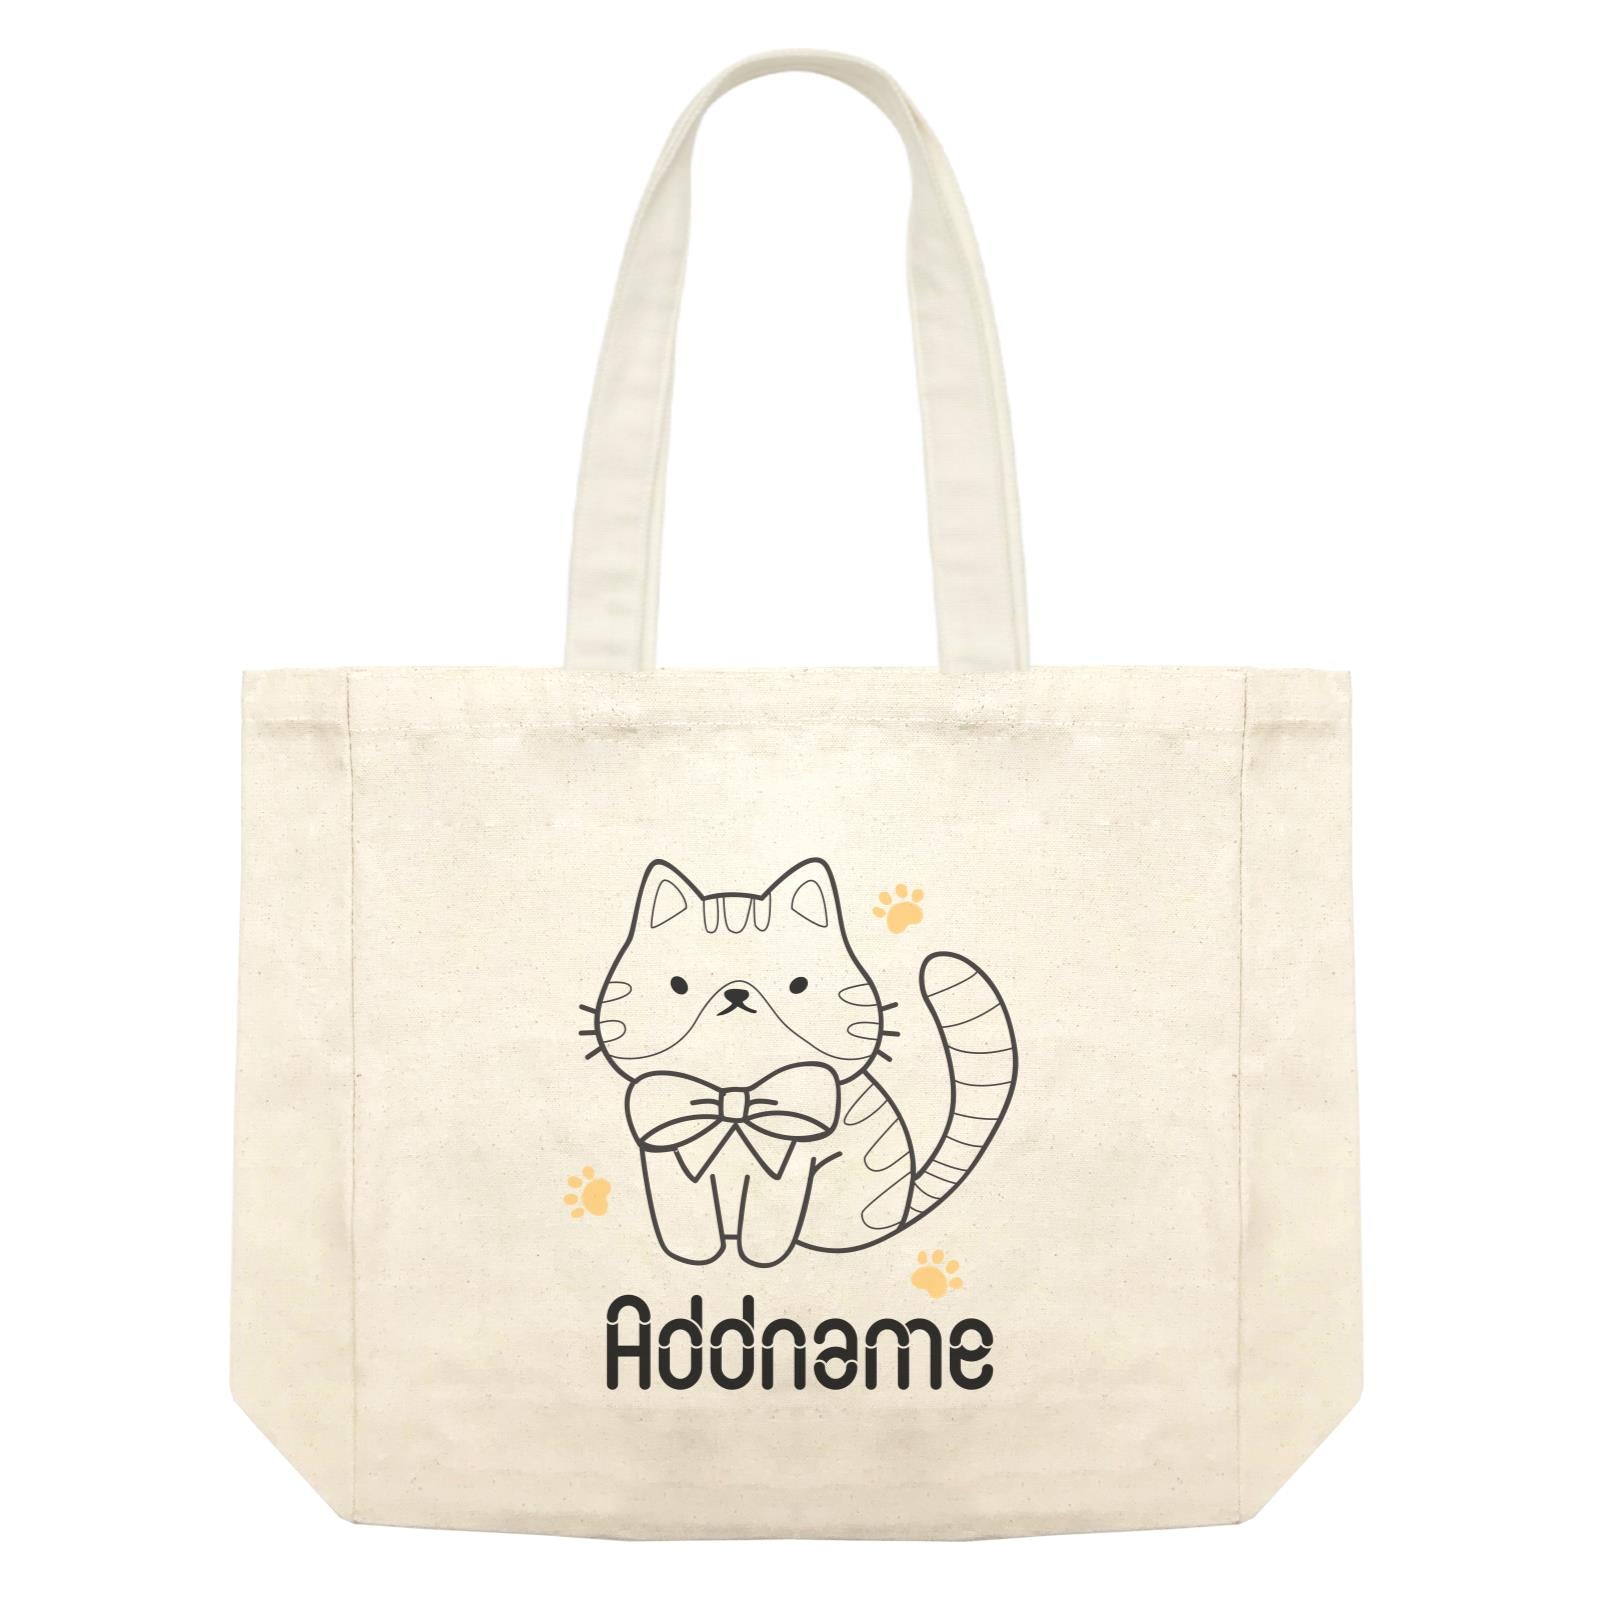 Coloring Outline Cute Hand Drawn Animals Cats Brown Cat With Ribbon Addname Shopping Bag